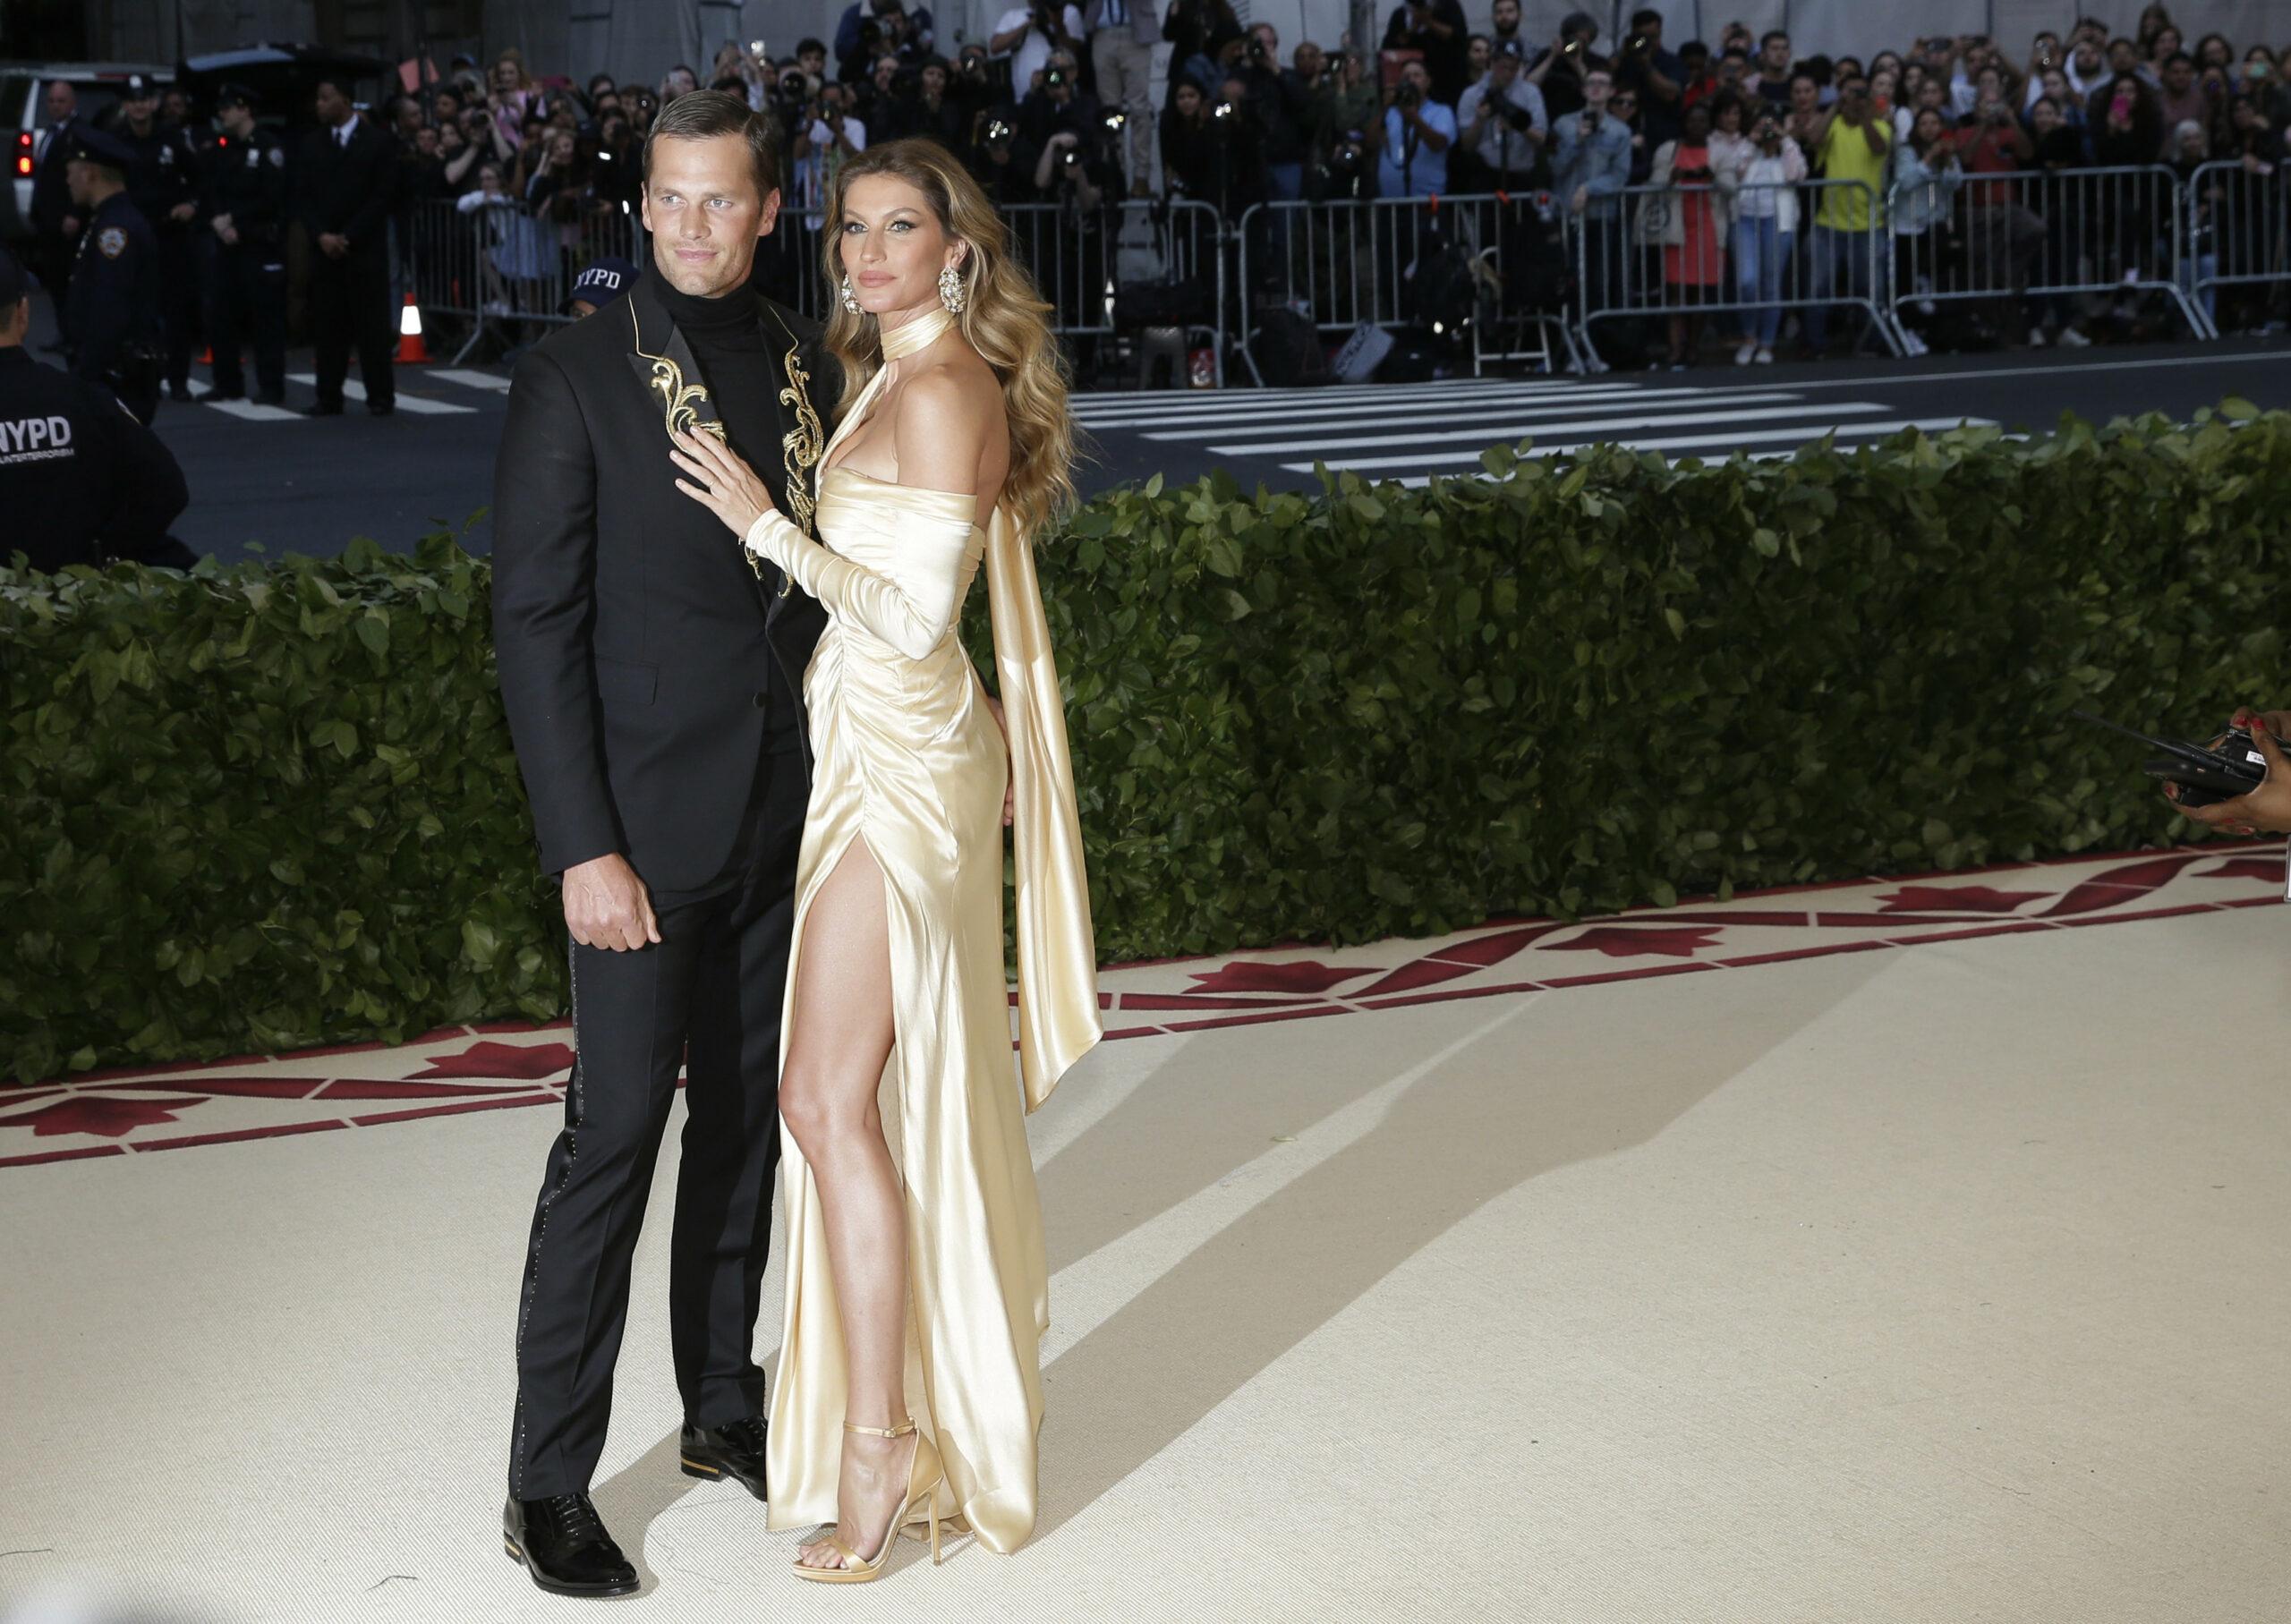 Why Tom Brady Allegedly ‘Never Wanted A Divorce’ From Gisele Bündchen